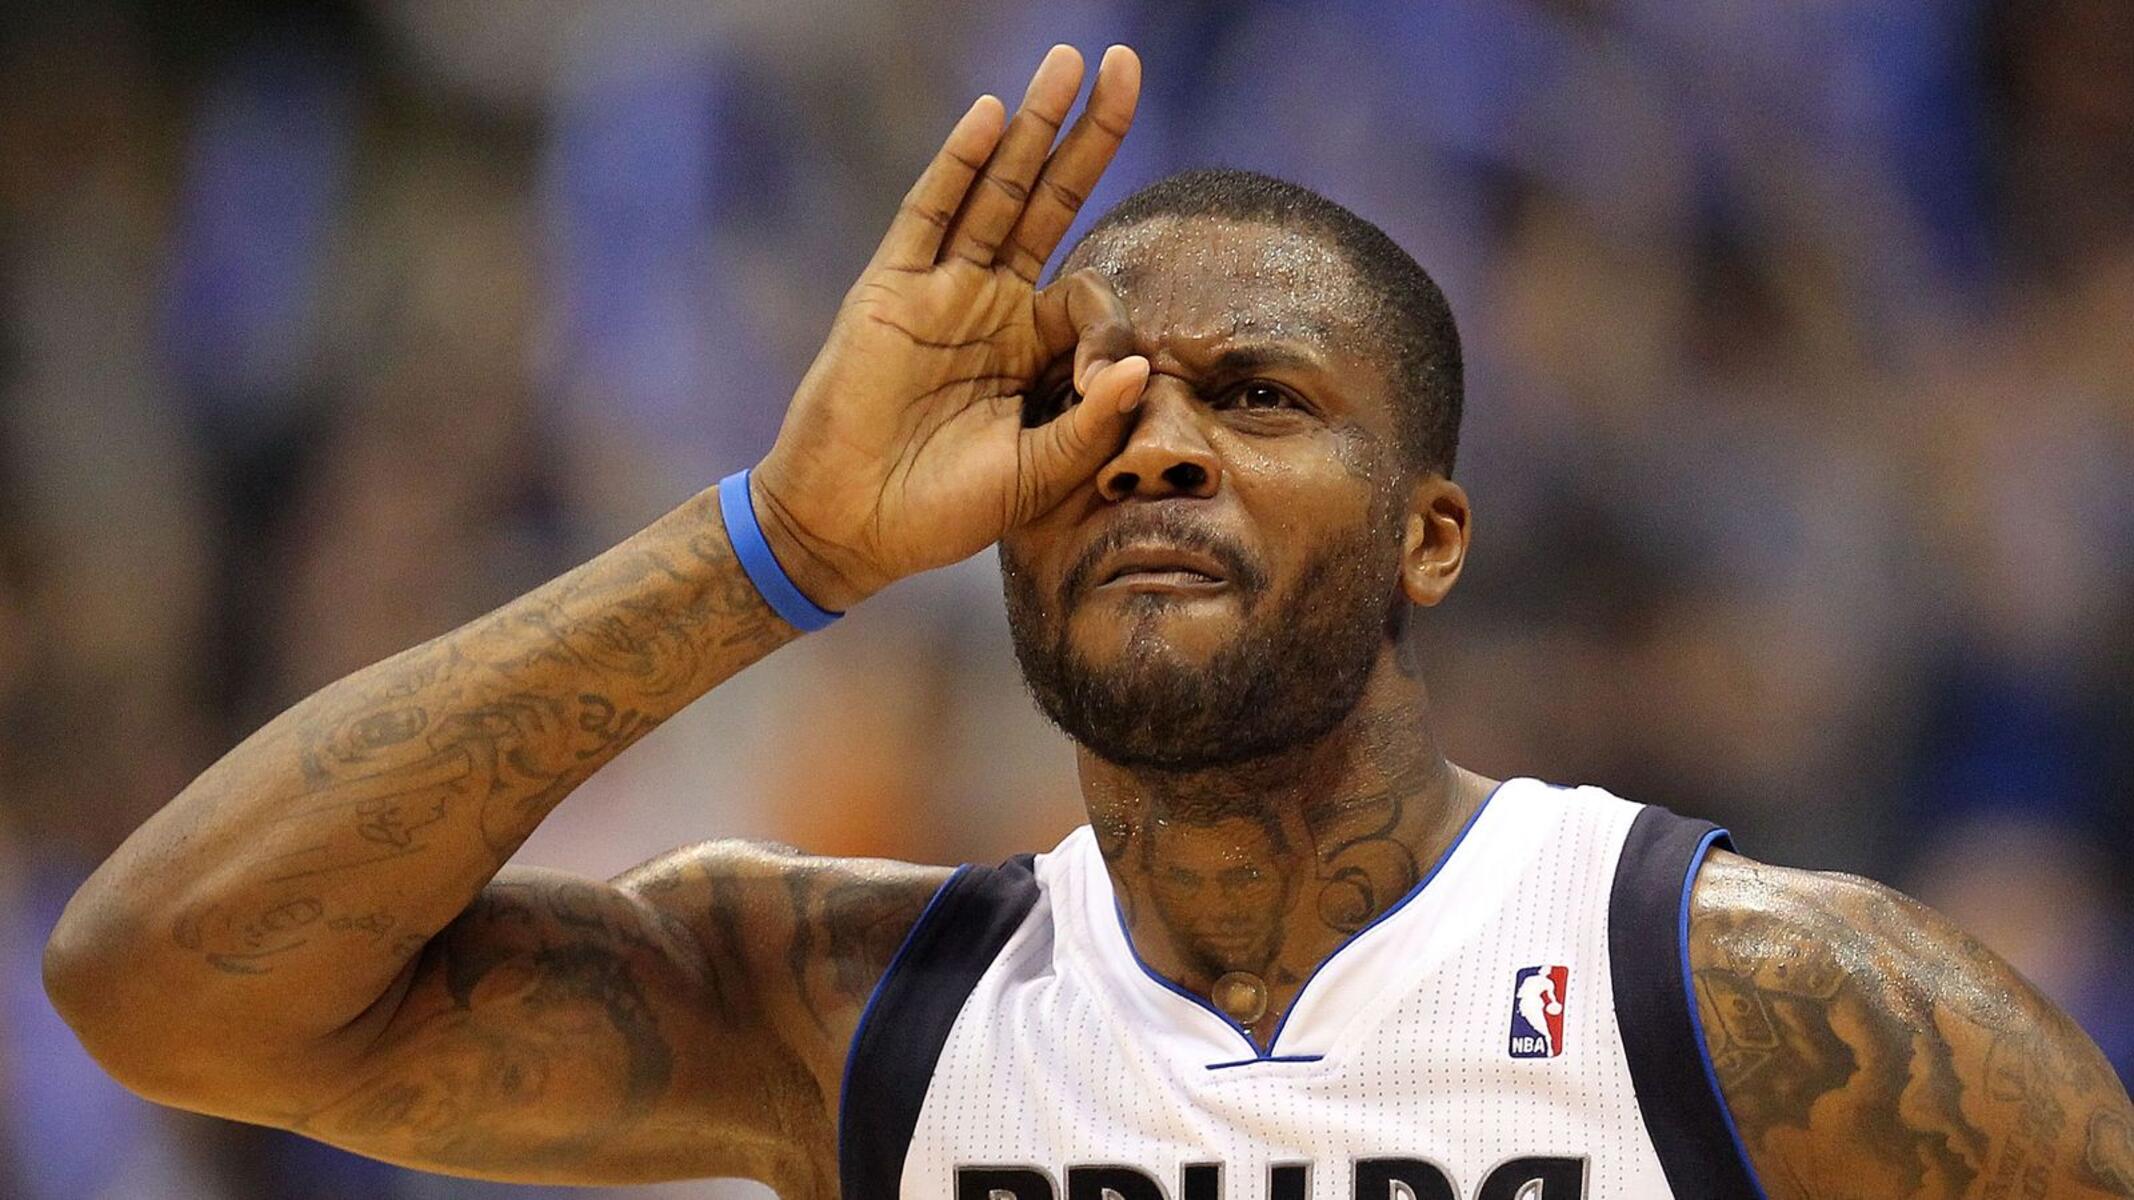 Remembering DeShawn Stevenson's unusual journey to becoming a